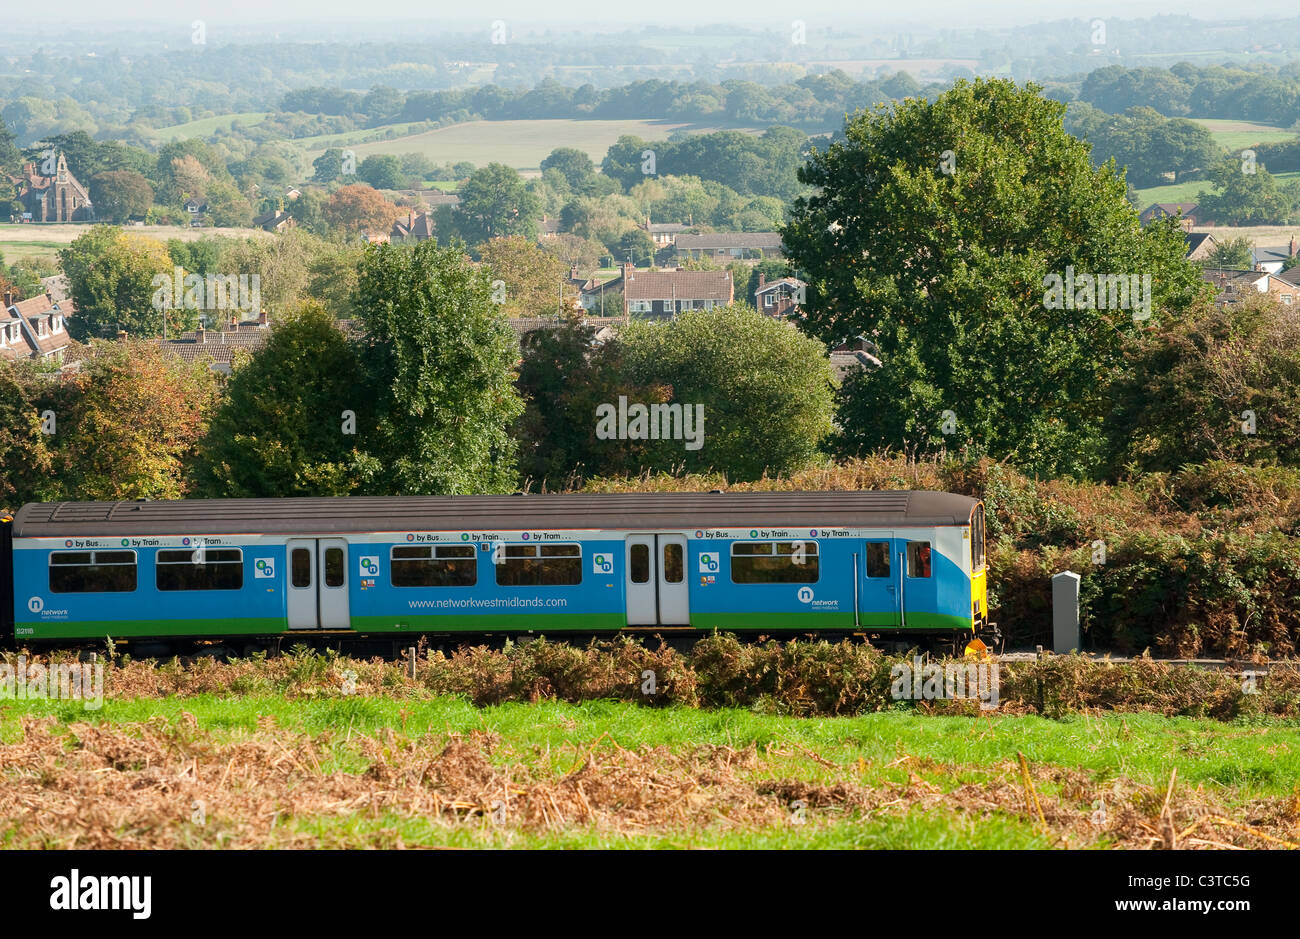 A train in Network West Midlands livery travelling through the English countryside. Stock Photo